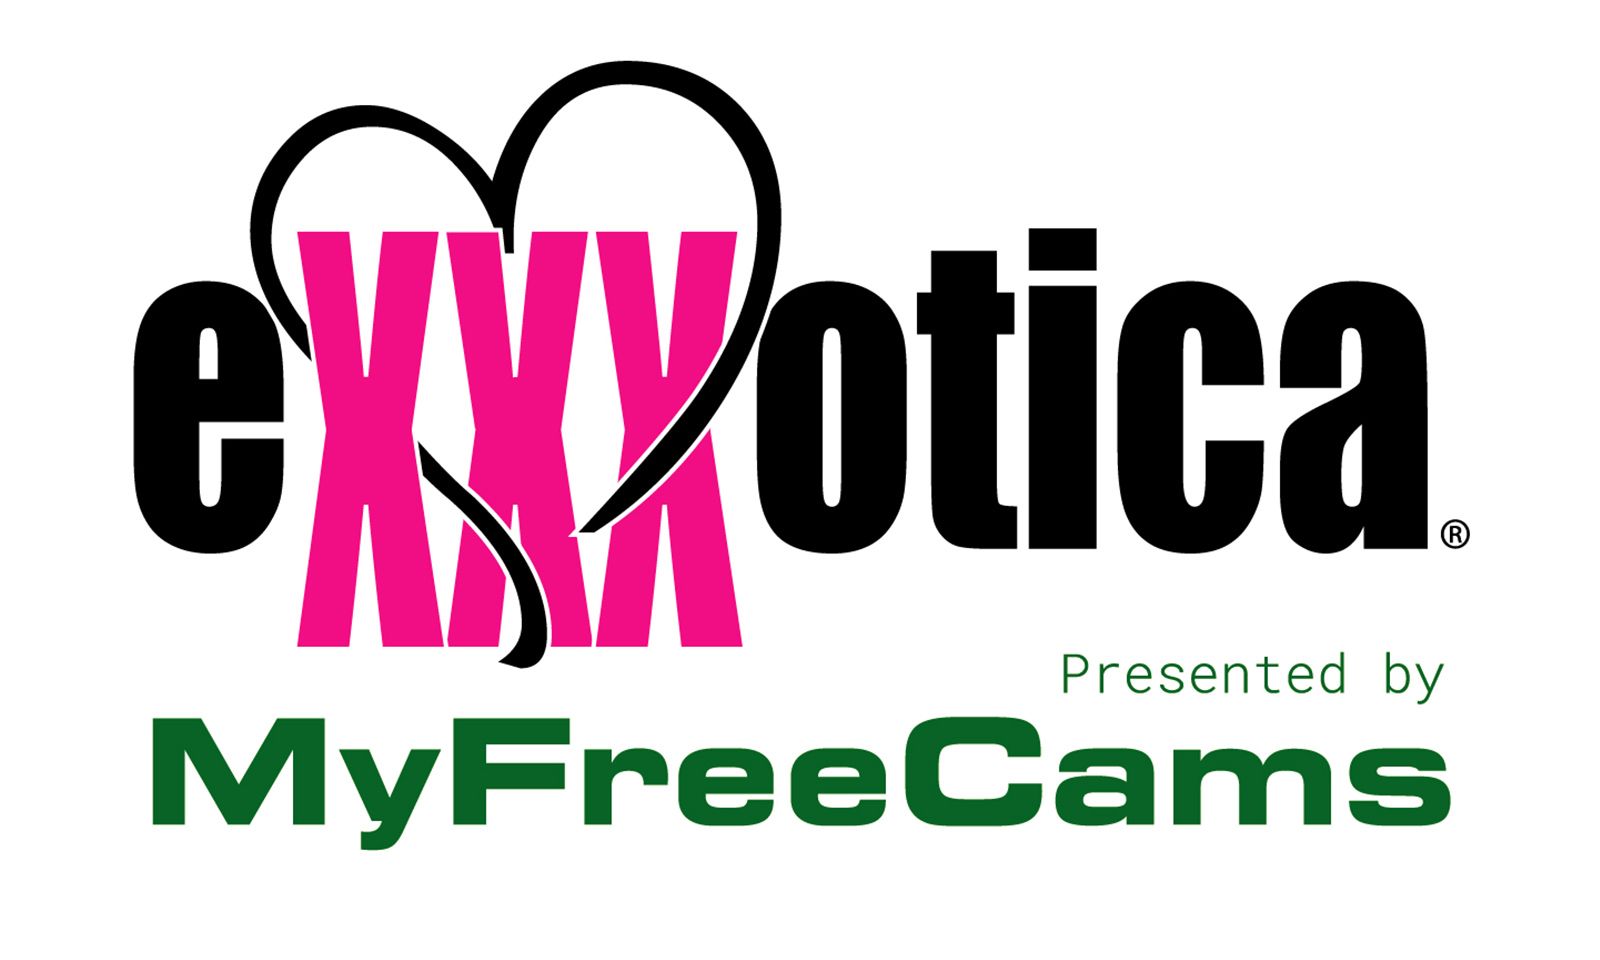 eXXXotica Will Be Back In Miami in September For Its 40th Show